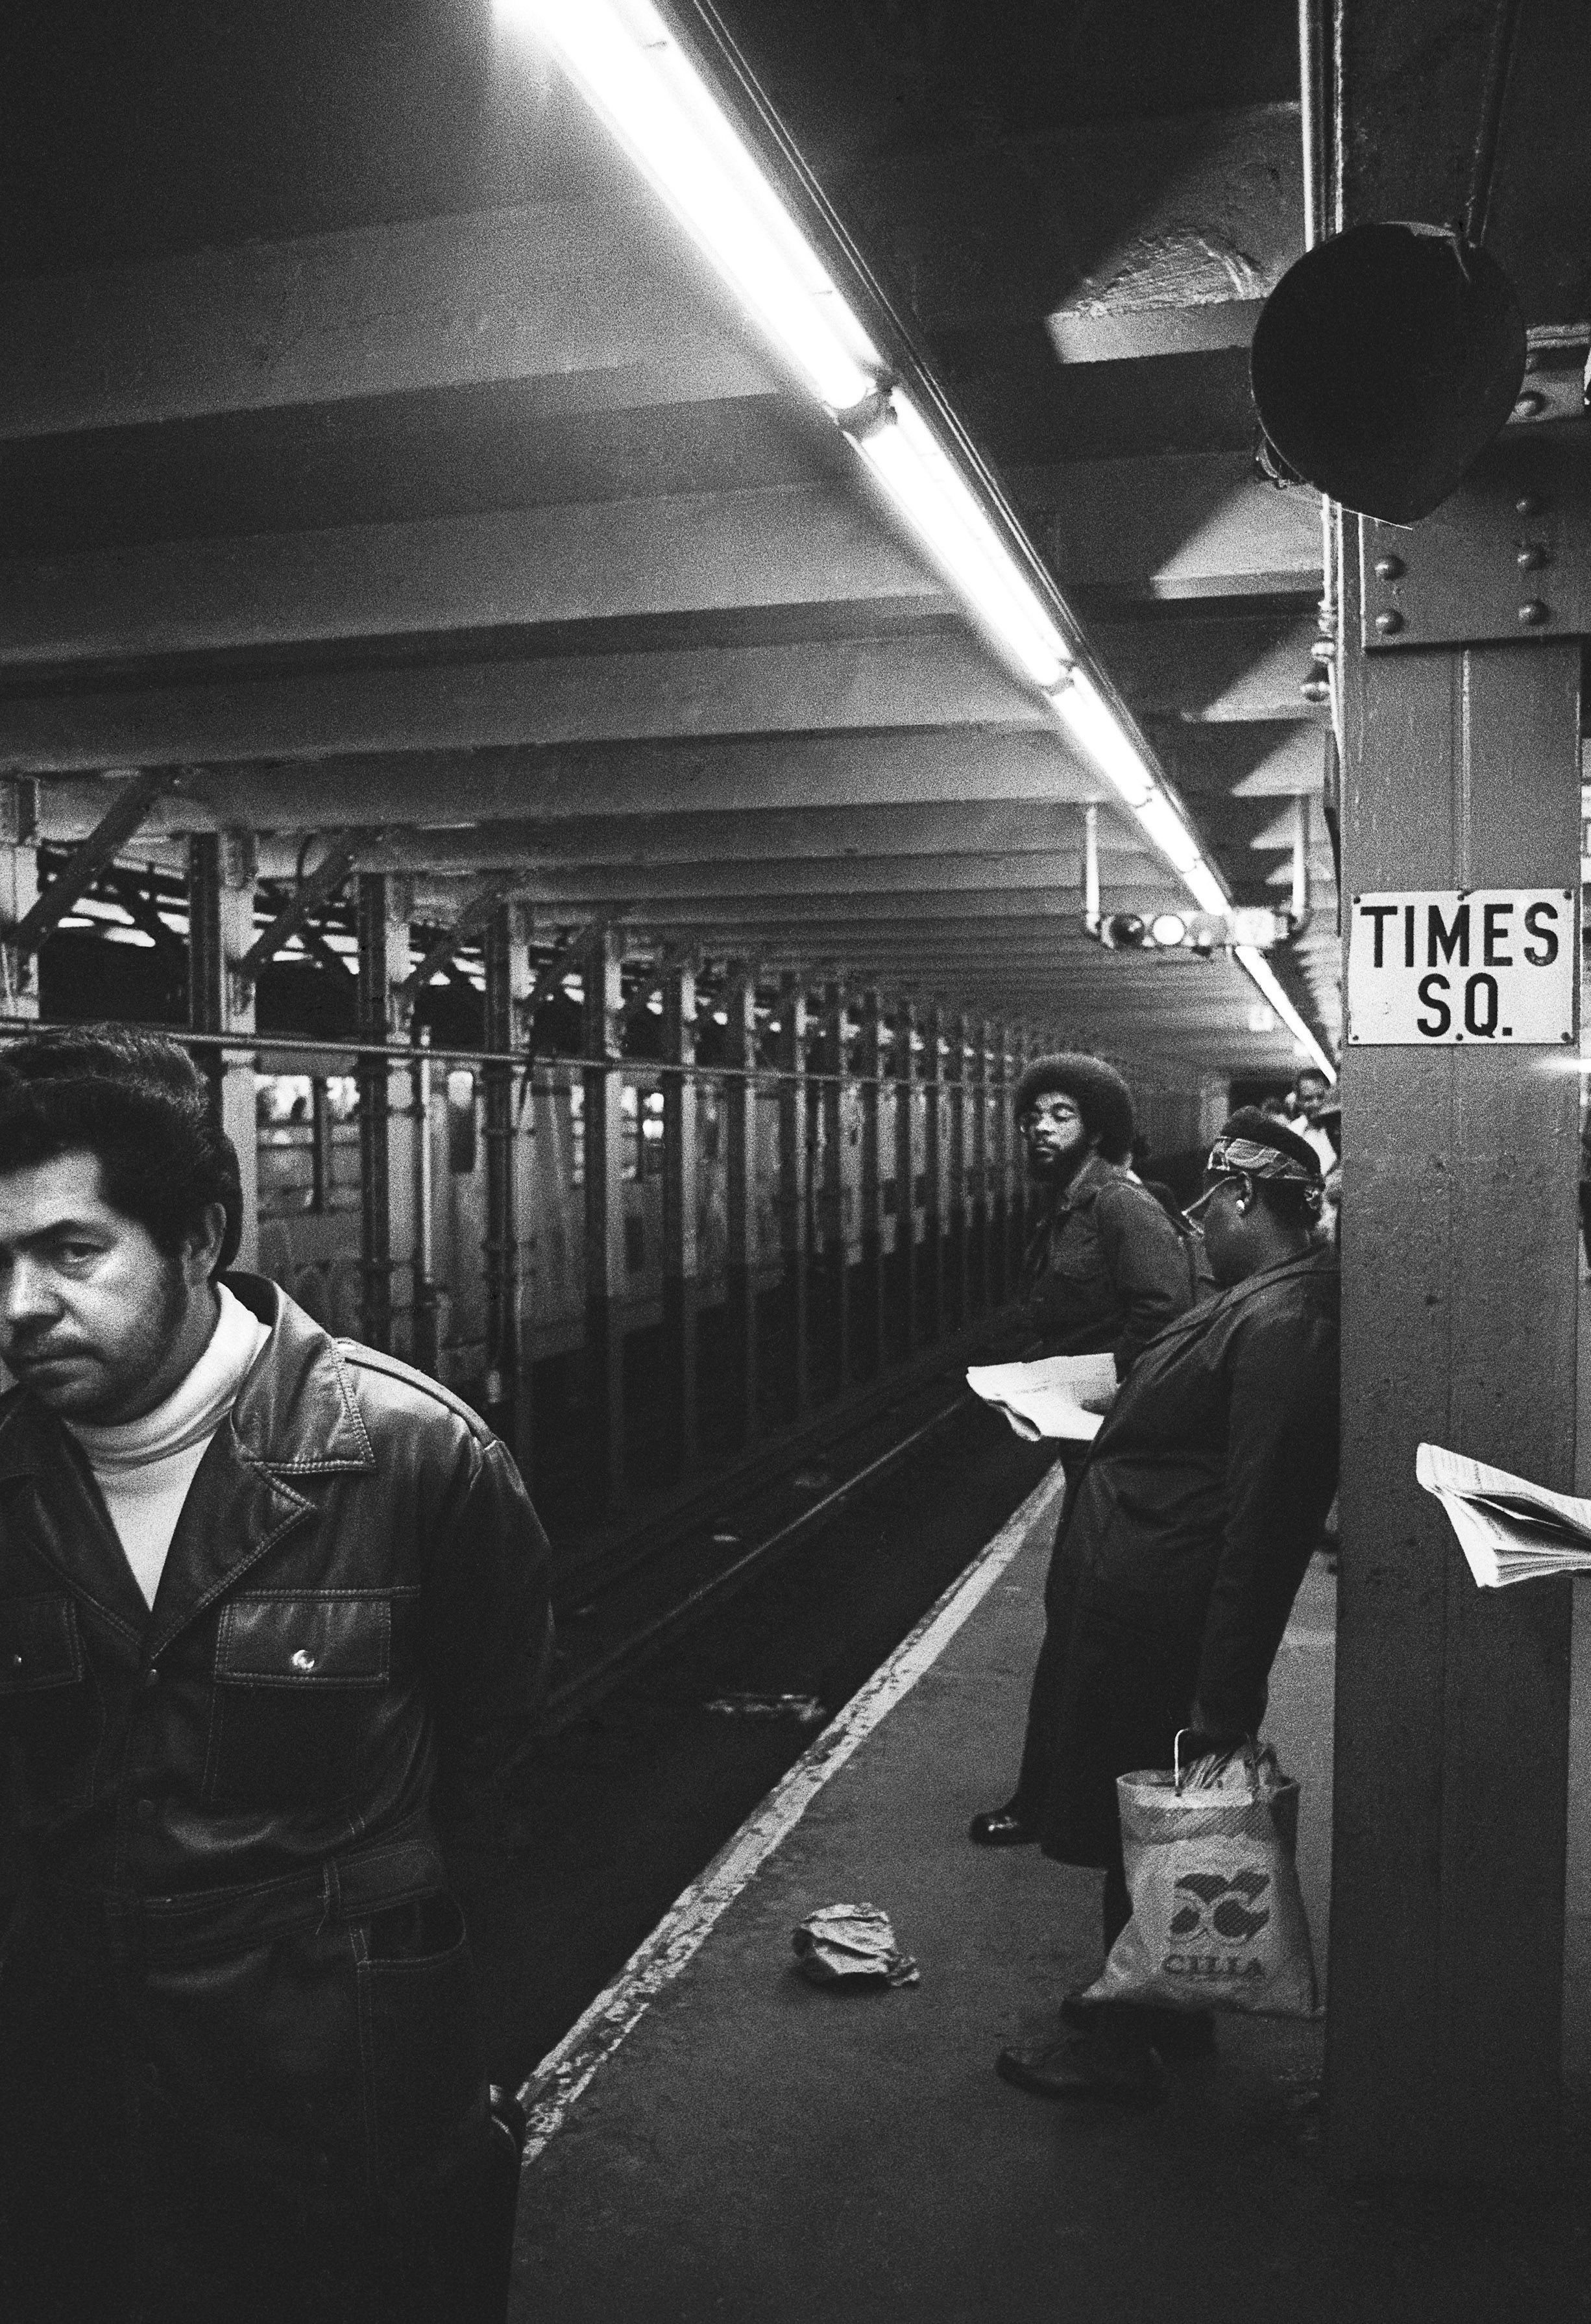 Welcome To 1970s New York City: Riding The 'Muggers’ Express' Train - Flashbak